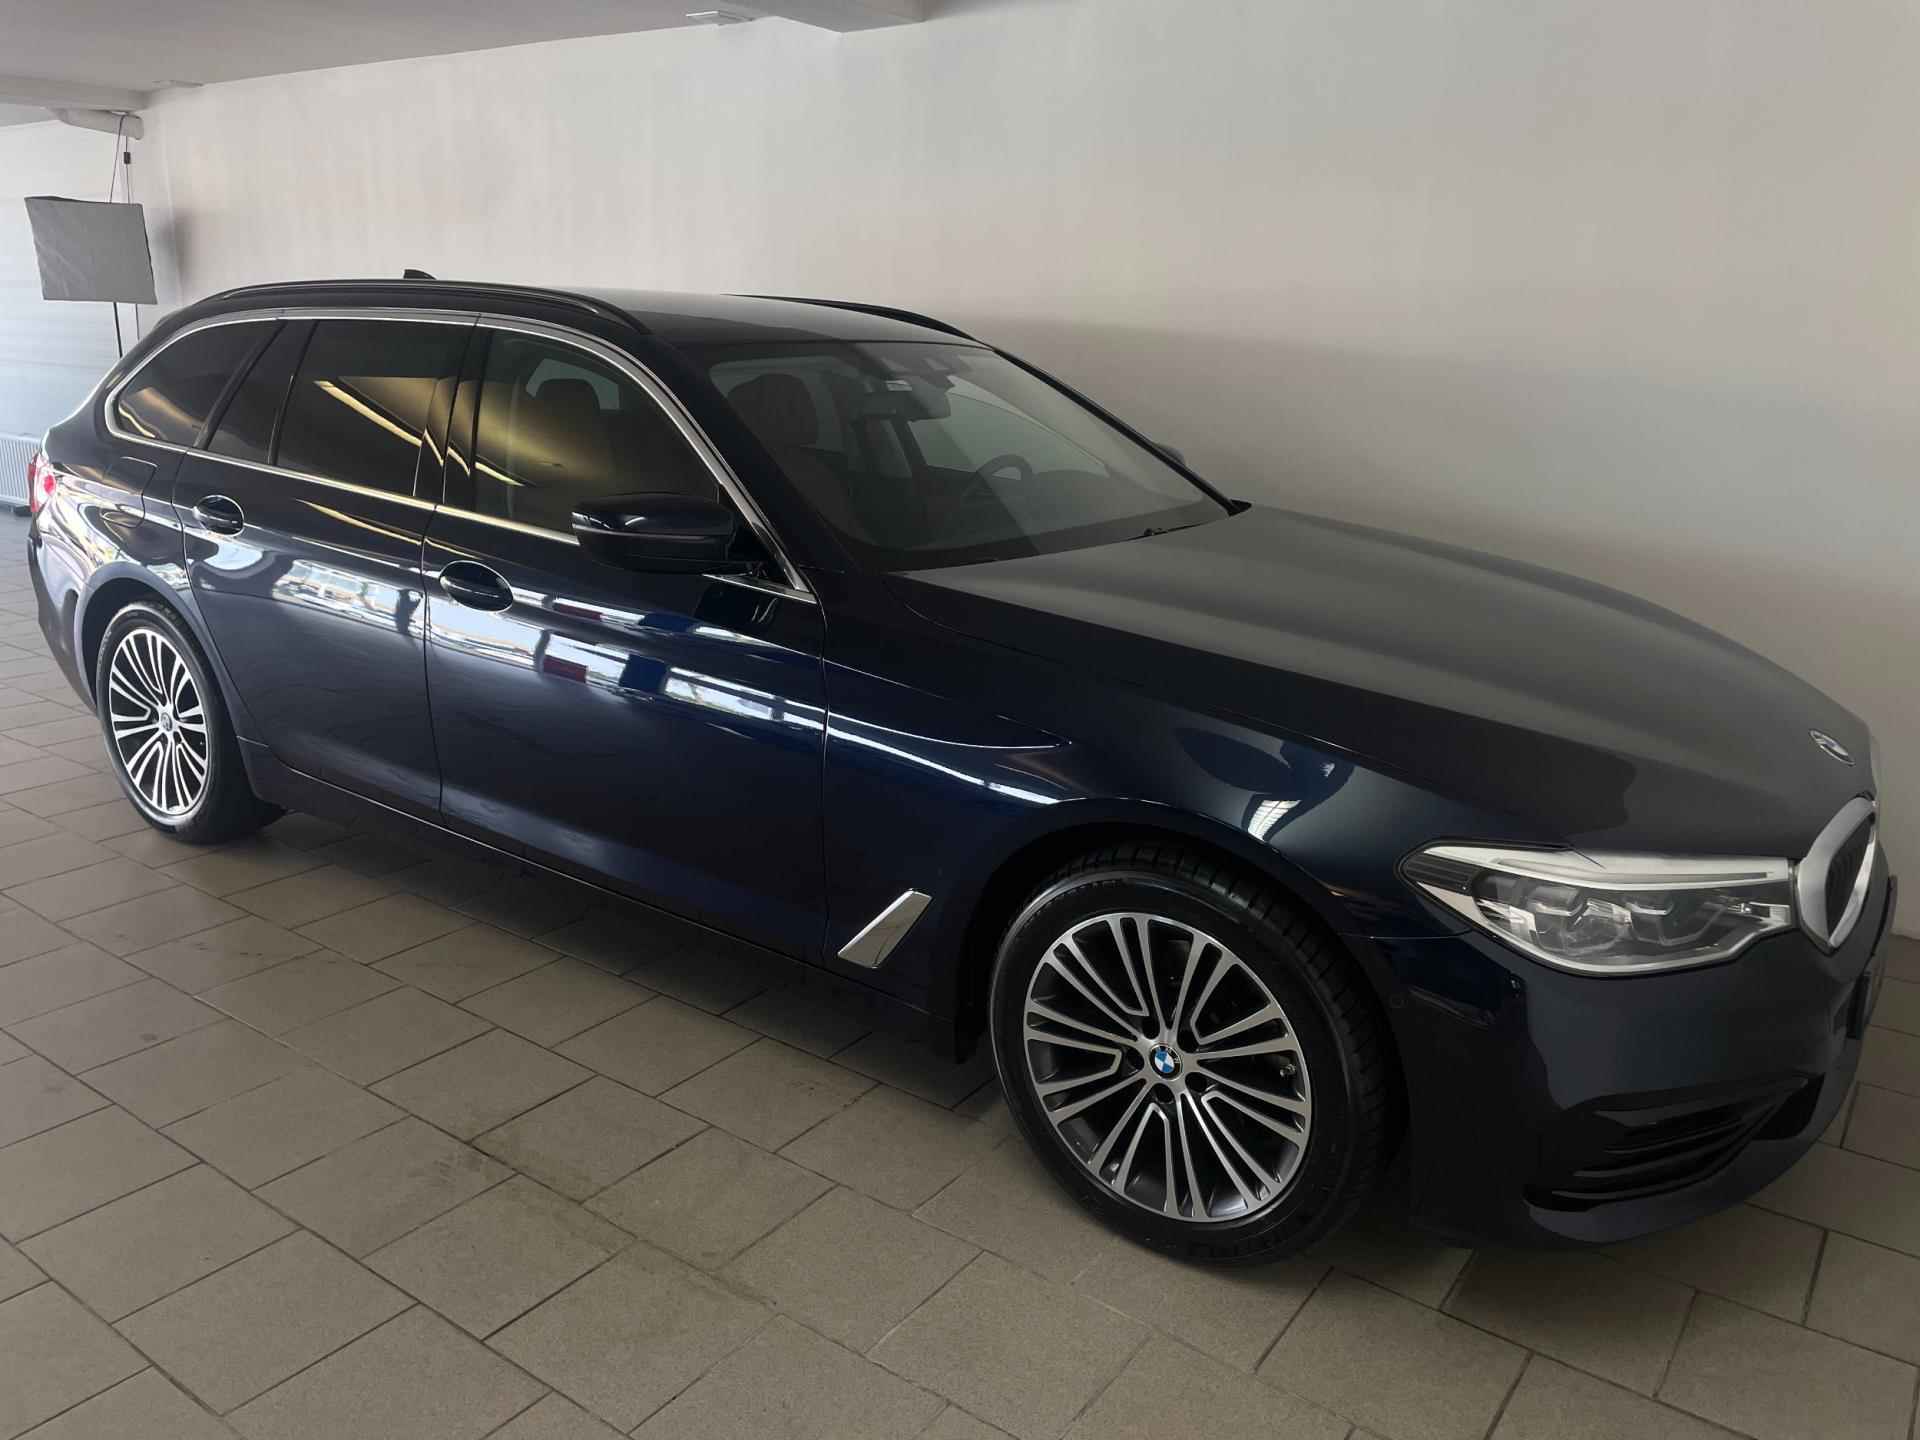 BMW 5-serie Touring 520i High Executive AUTOMAAT NAVI CRUISE BLUETOOTH LED VERL STUURVERW STOELVERW STOELVENT LEDER NIEUWSTAAT - 12/57